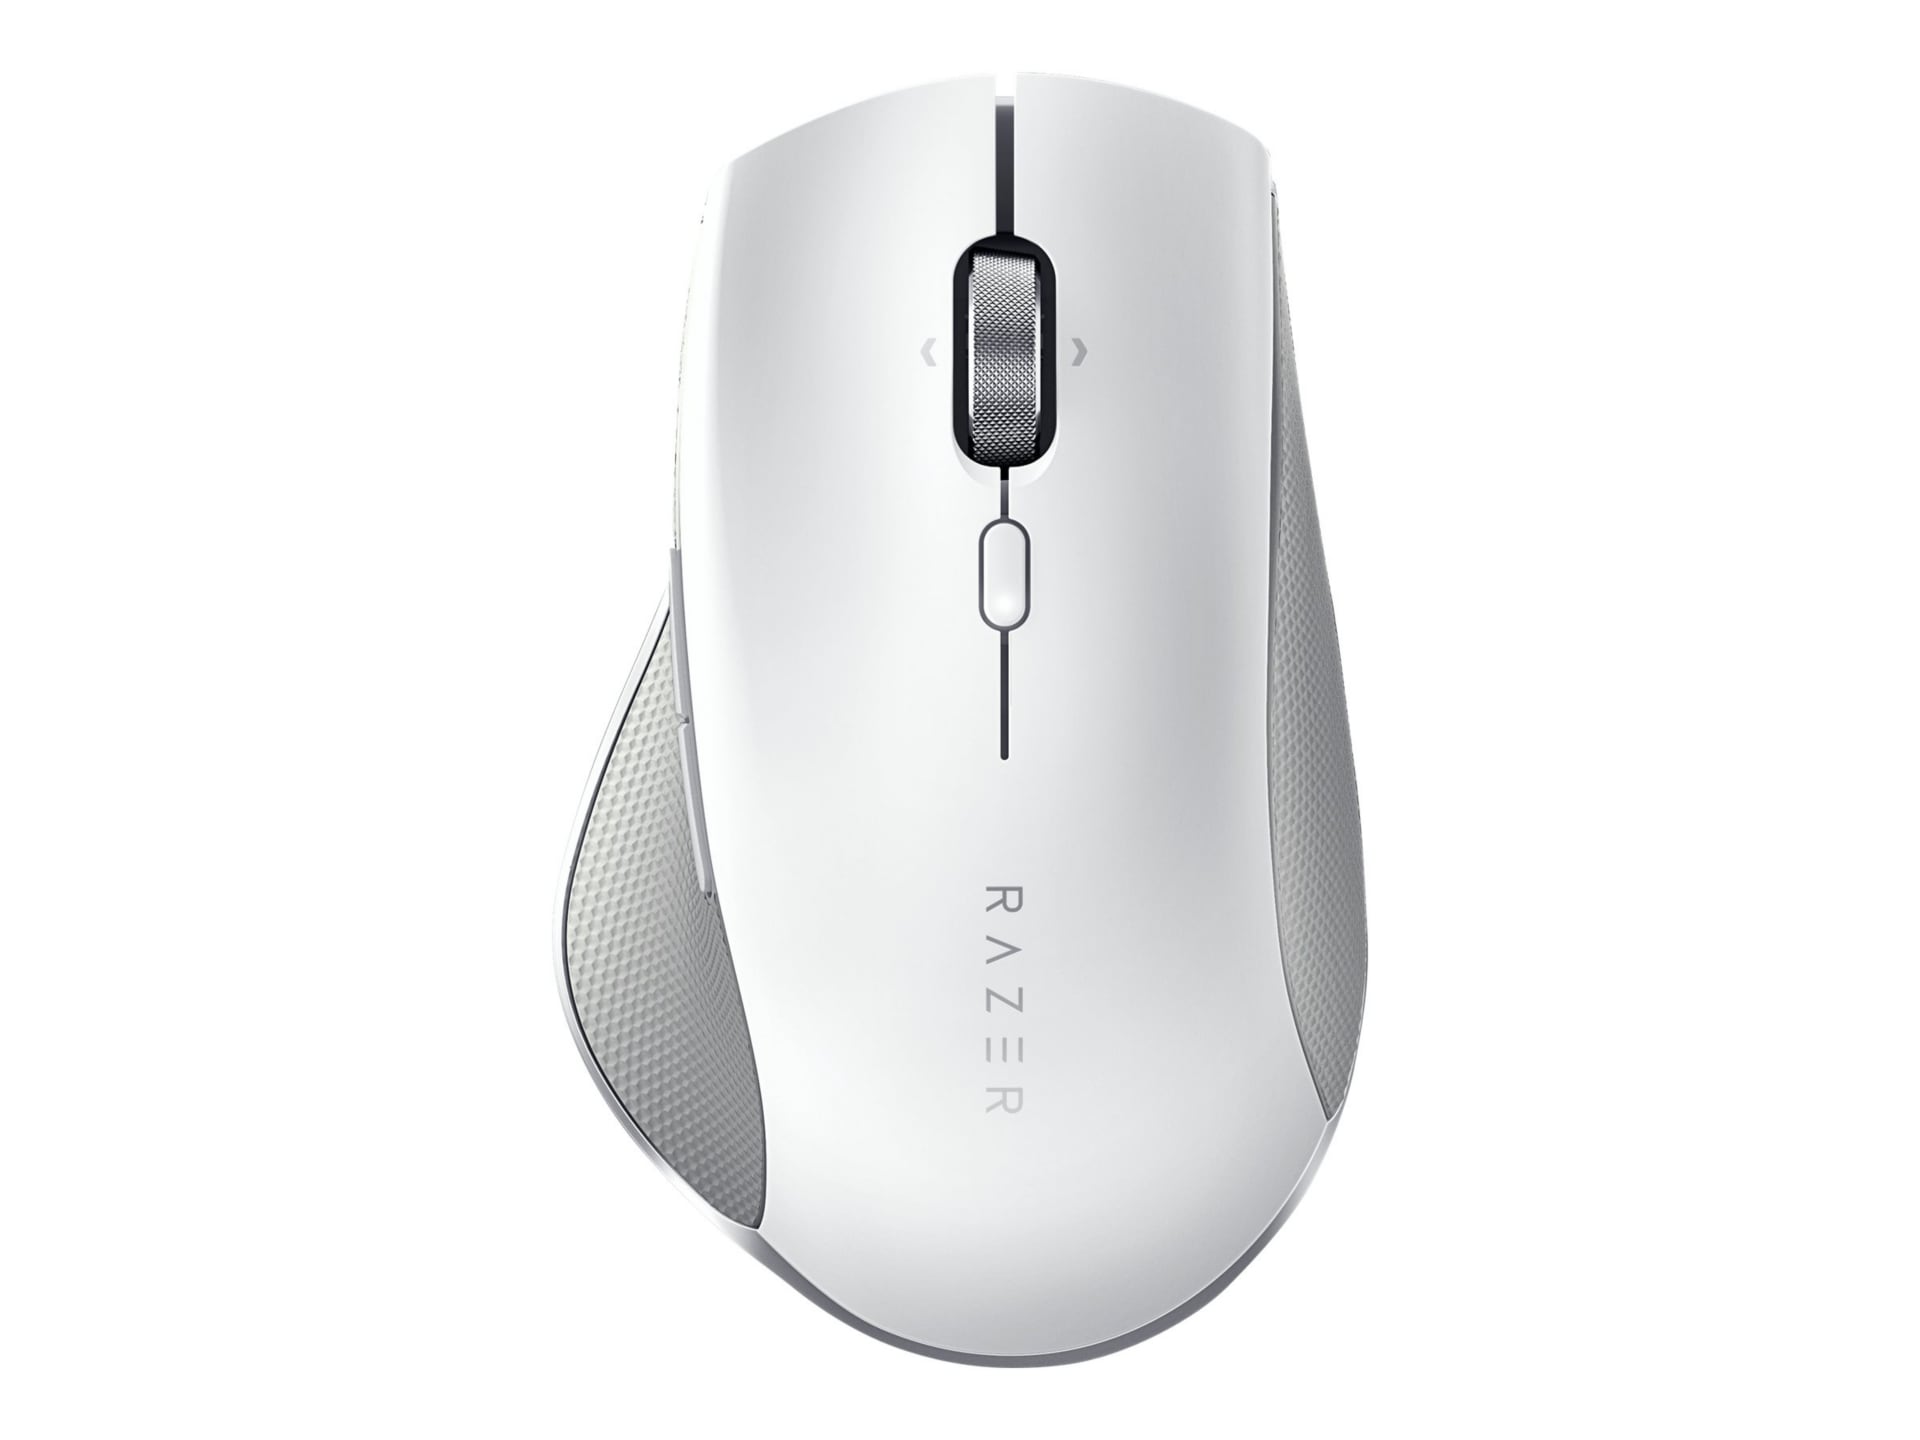 Humanscale Pro Click - mouse - USB, Bluetooth, 2.4 GHz - white with gray tr